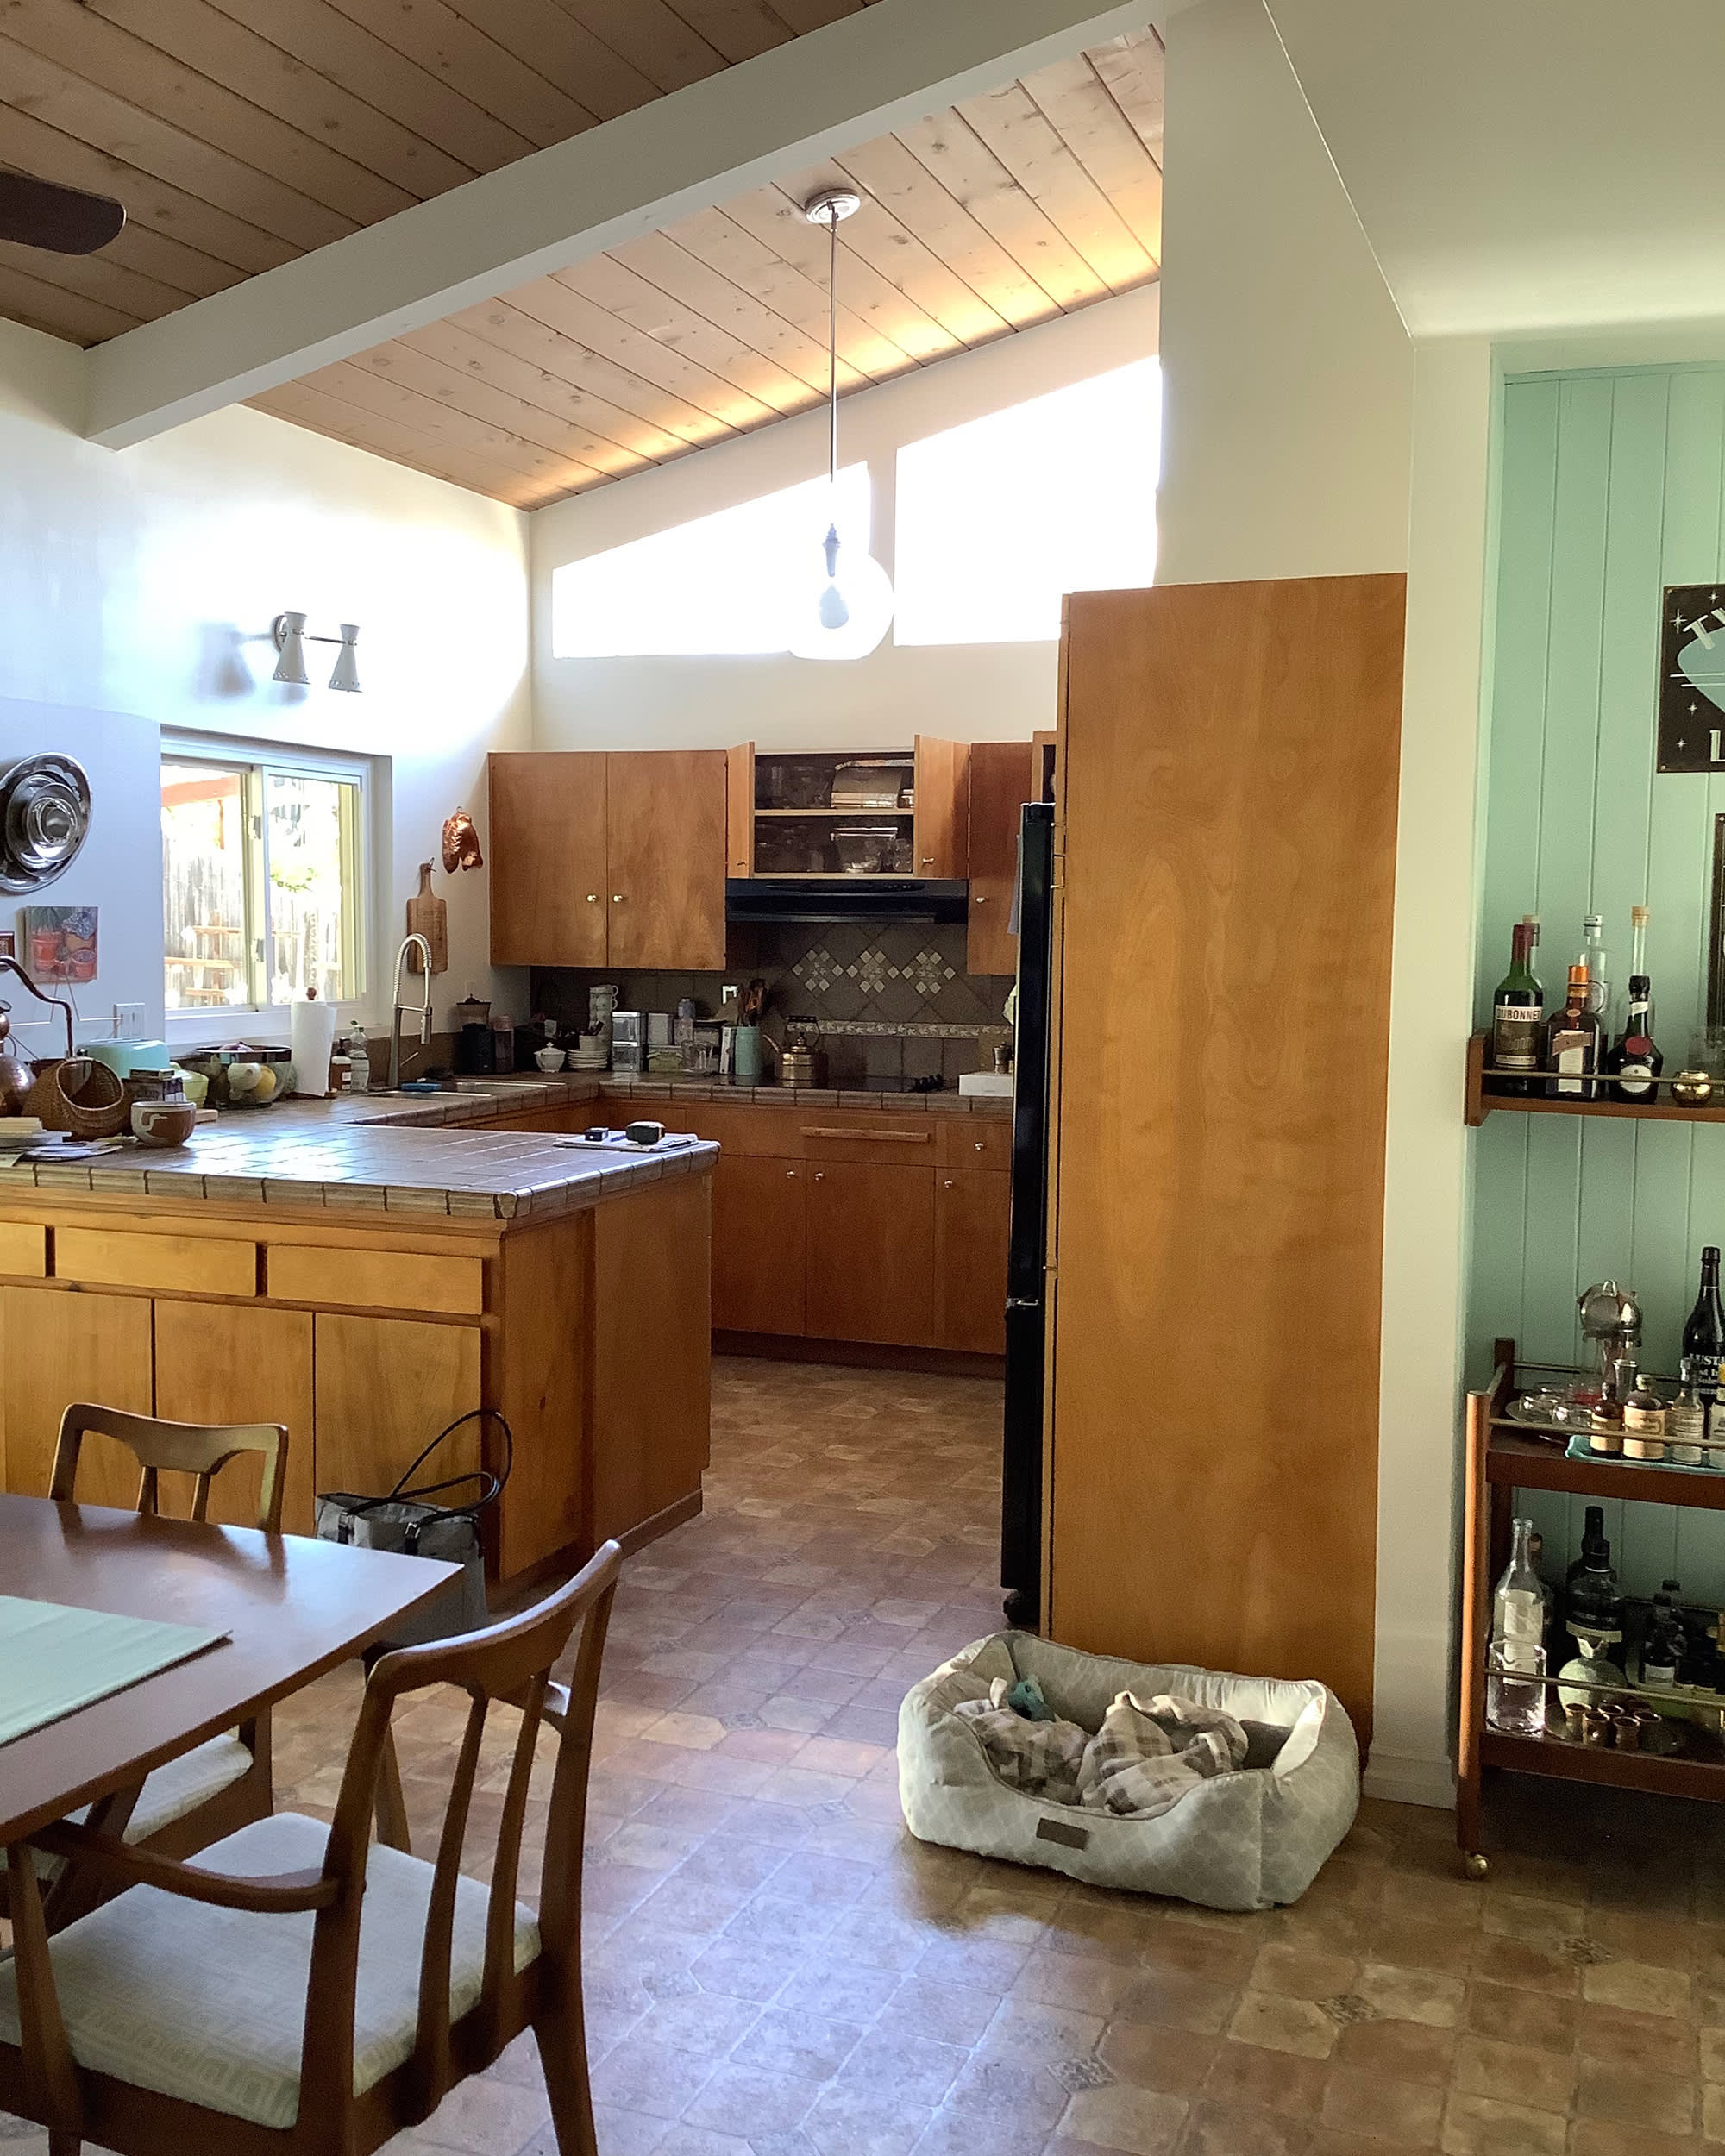 Space of the Week: This Kitchen Remodel Is Midcentury Modern Done